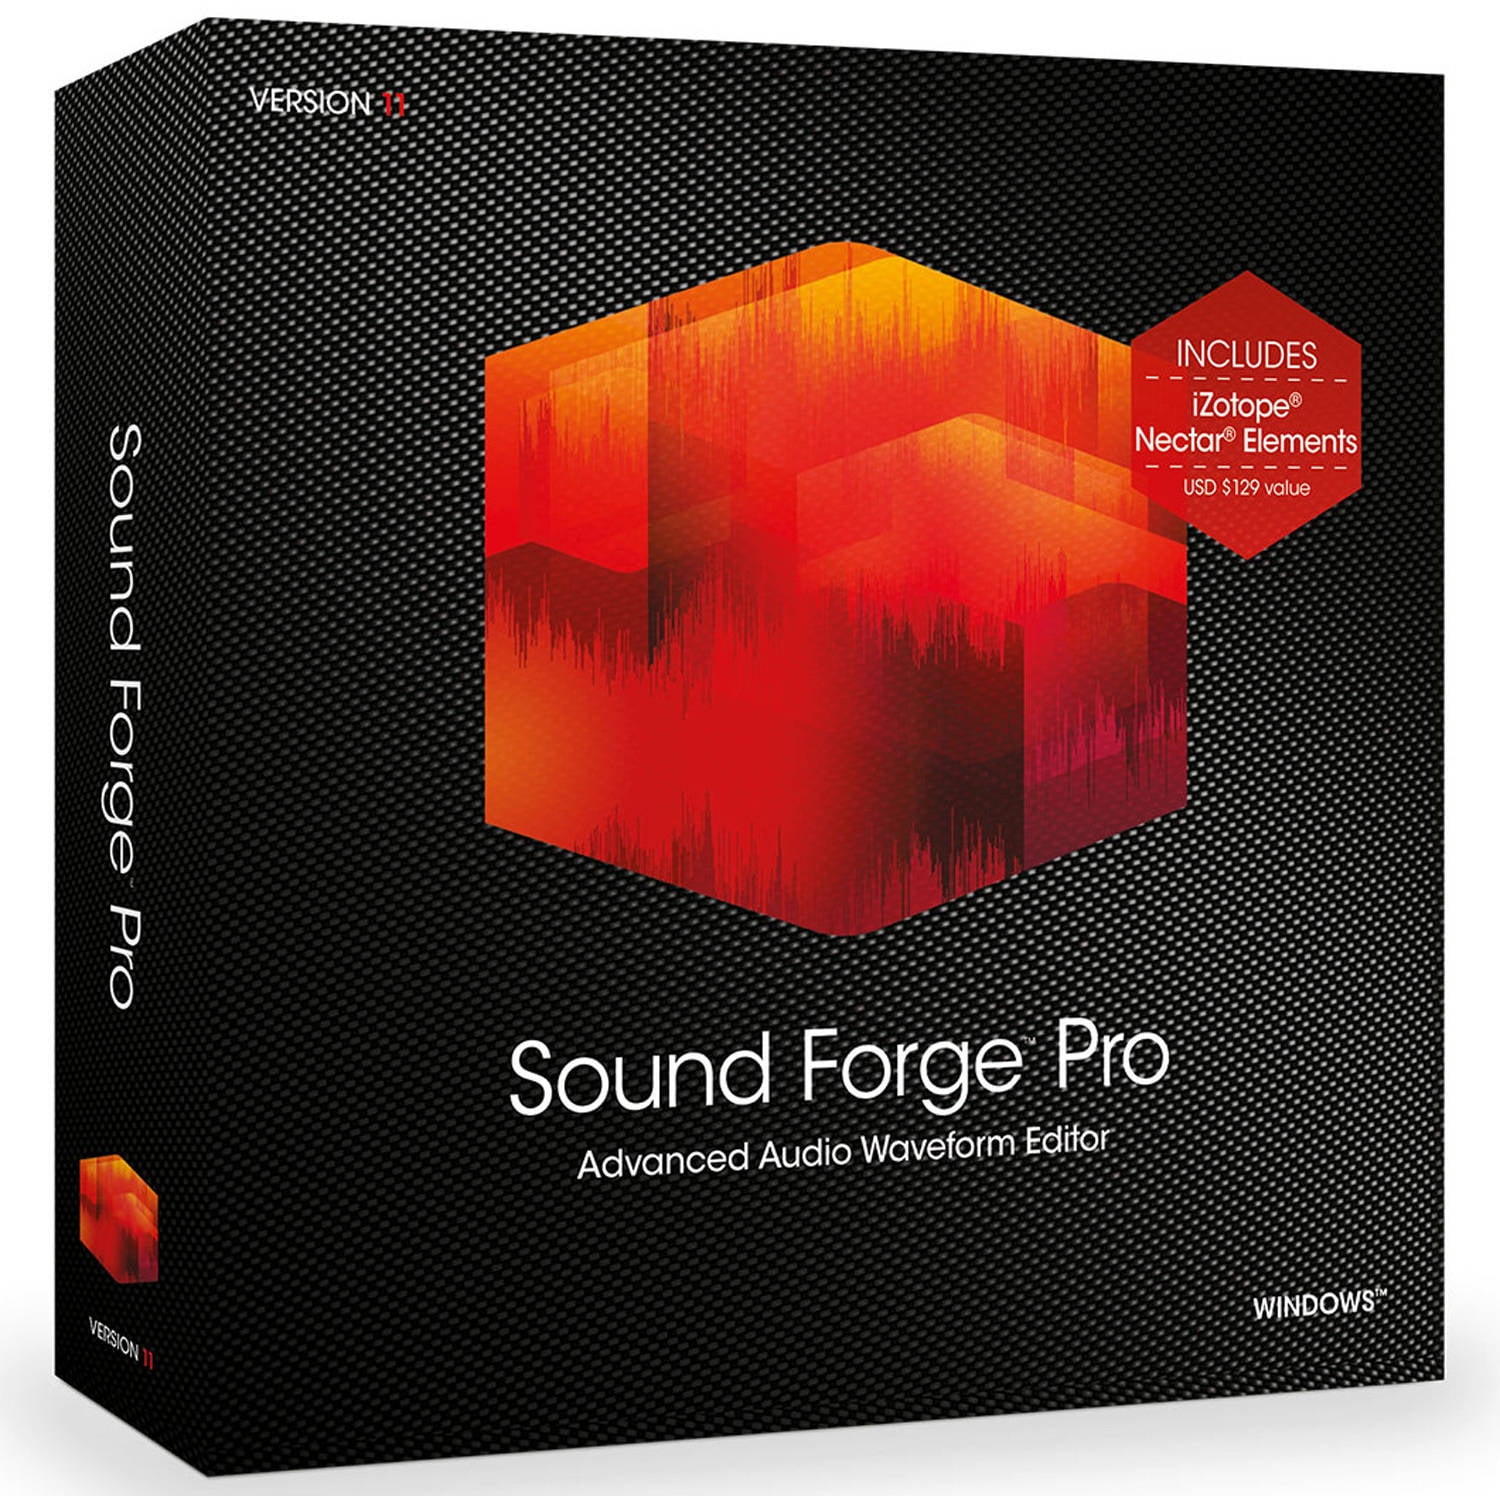 sound forge pro mac overview